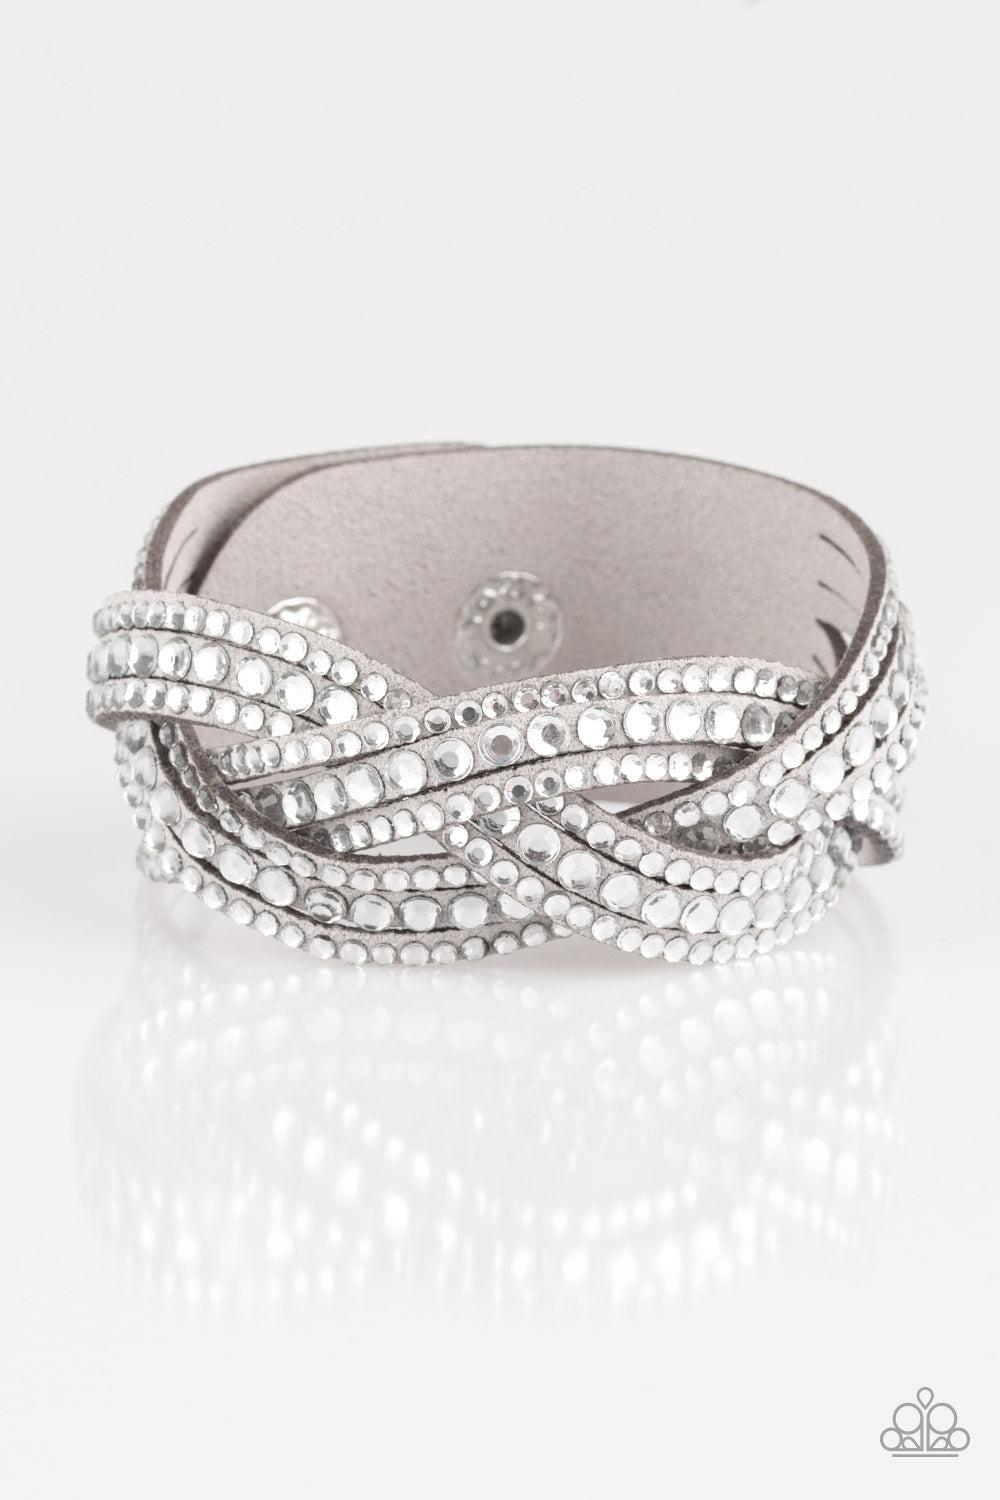 Bring on the Bling Silver Bracelet - Paparazzi Accessories- lightbox - CarasShop.com - $5 Jewelry by Cara Jewels